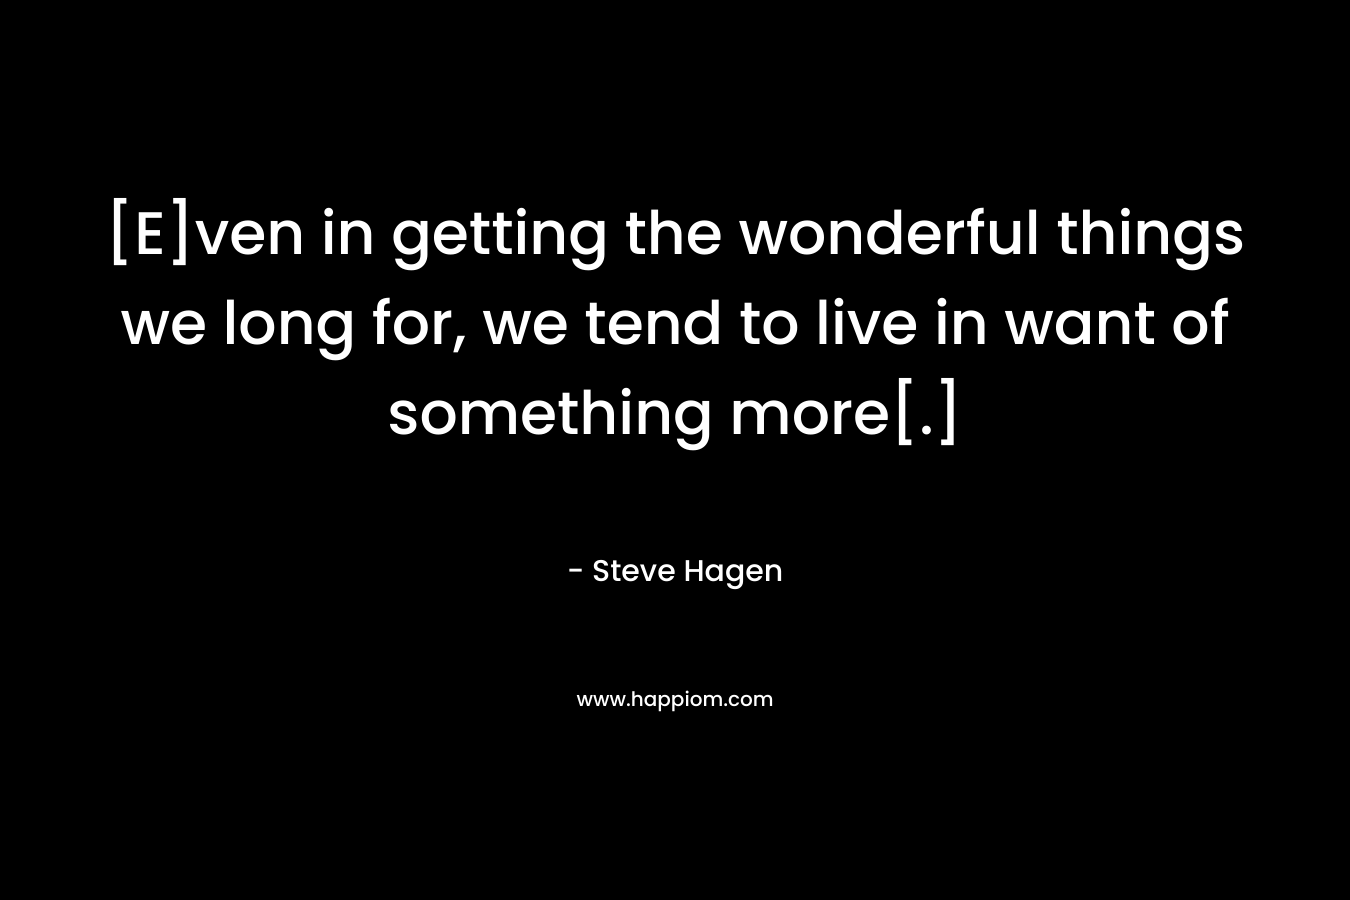 [E]ven in getting the wonderful things we long for, we tend to live in want of something more[.] – Steve Hagen